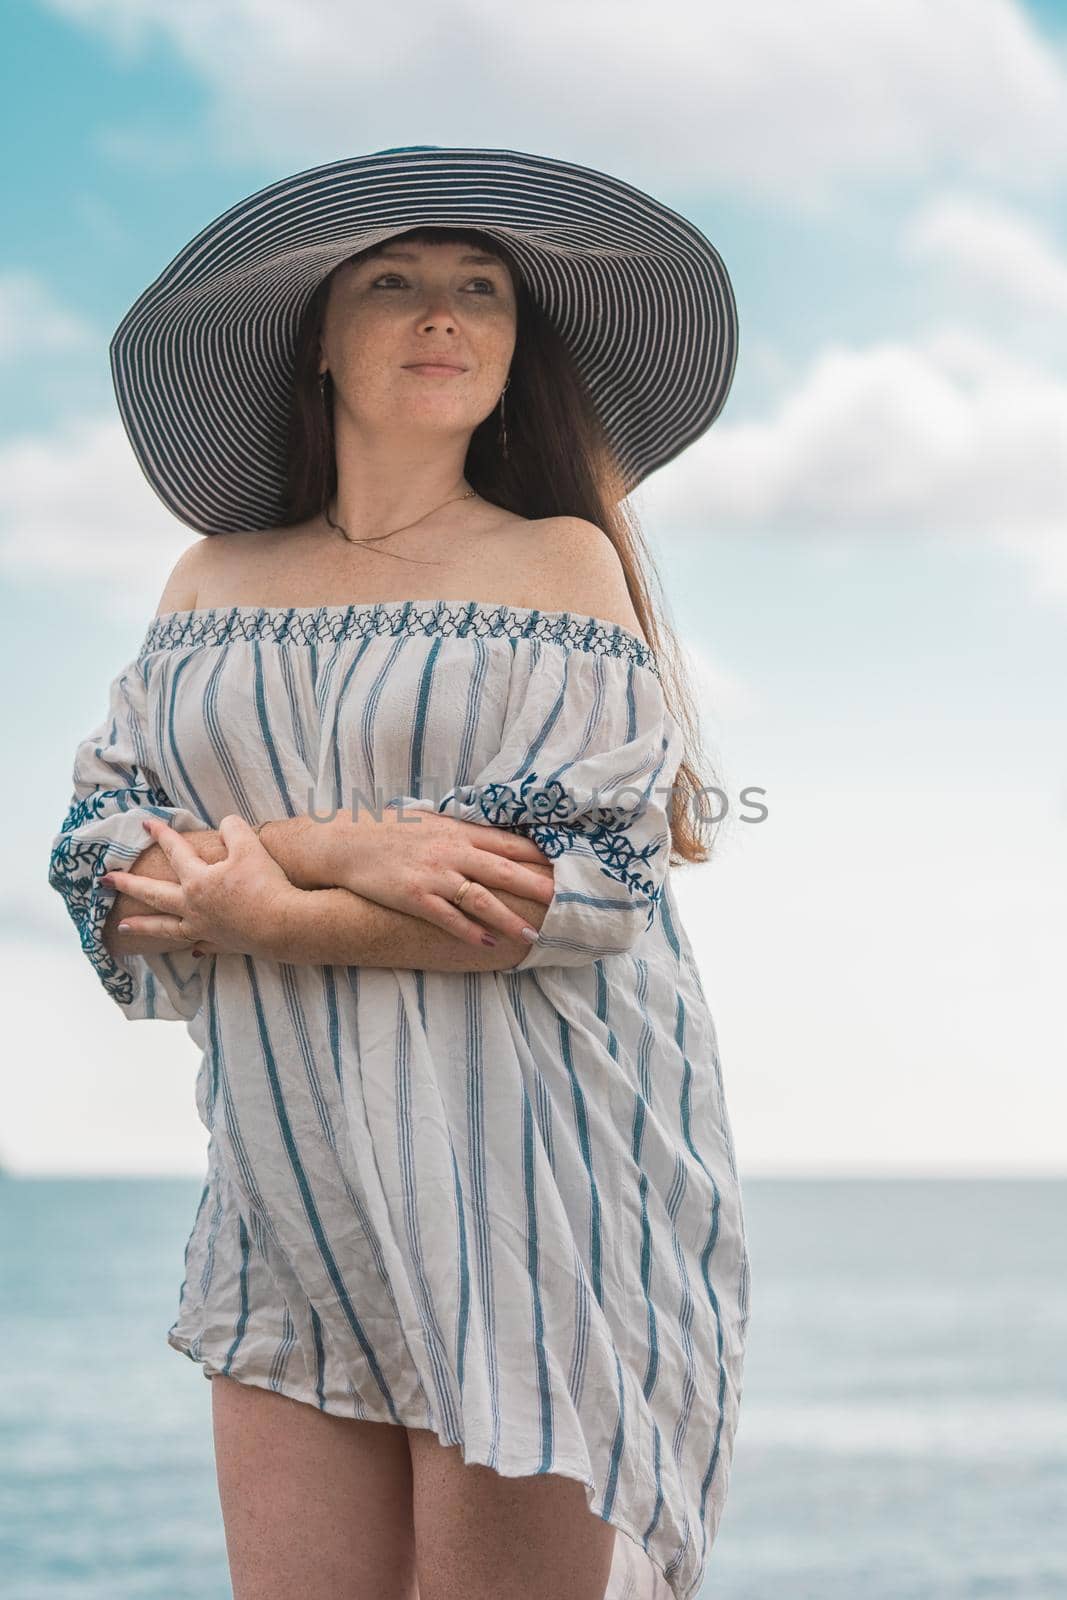 A girl with brown hair and freckles on her face and shoulders in a big blue hat with a large brim and a cape made of cotton fabric on the beach by the sea looks into the distance by olex